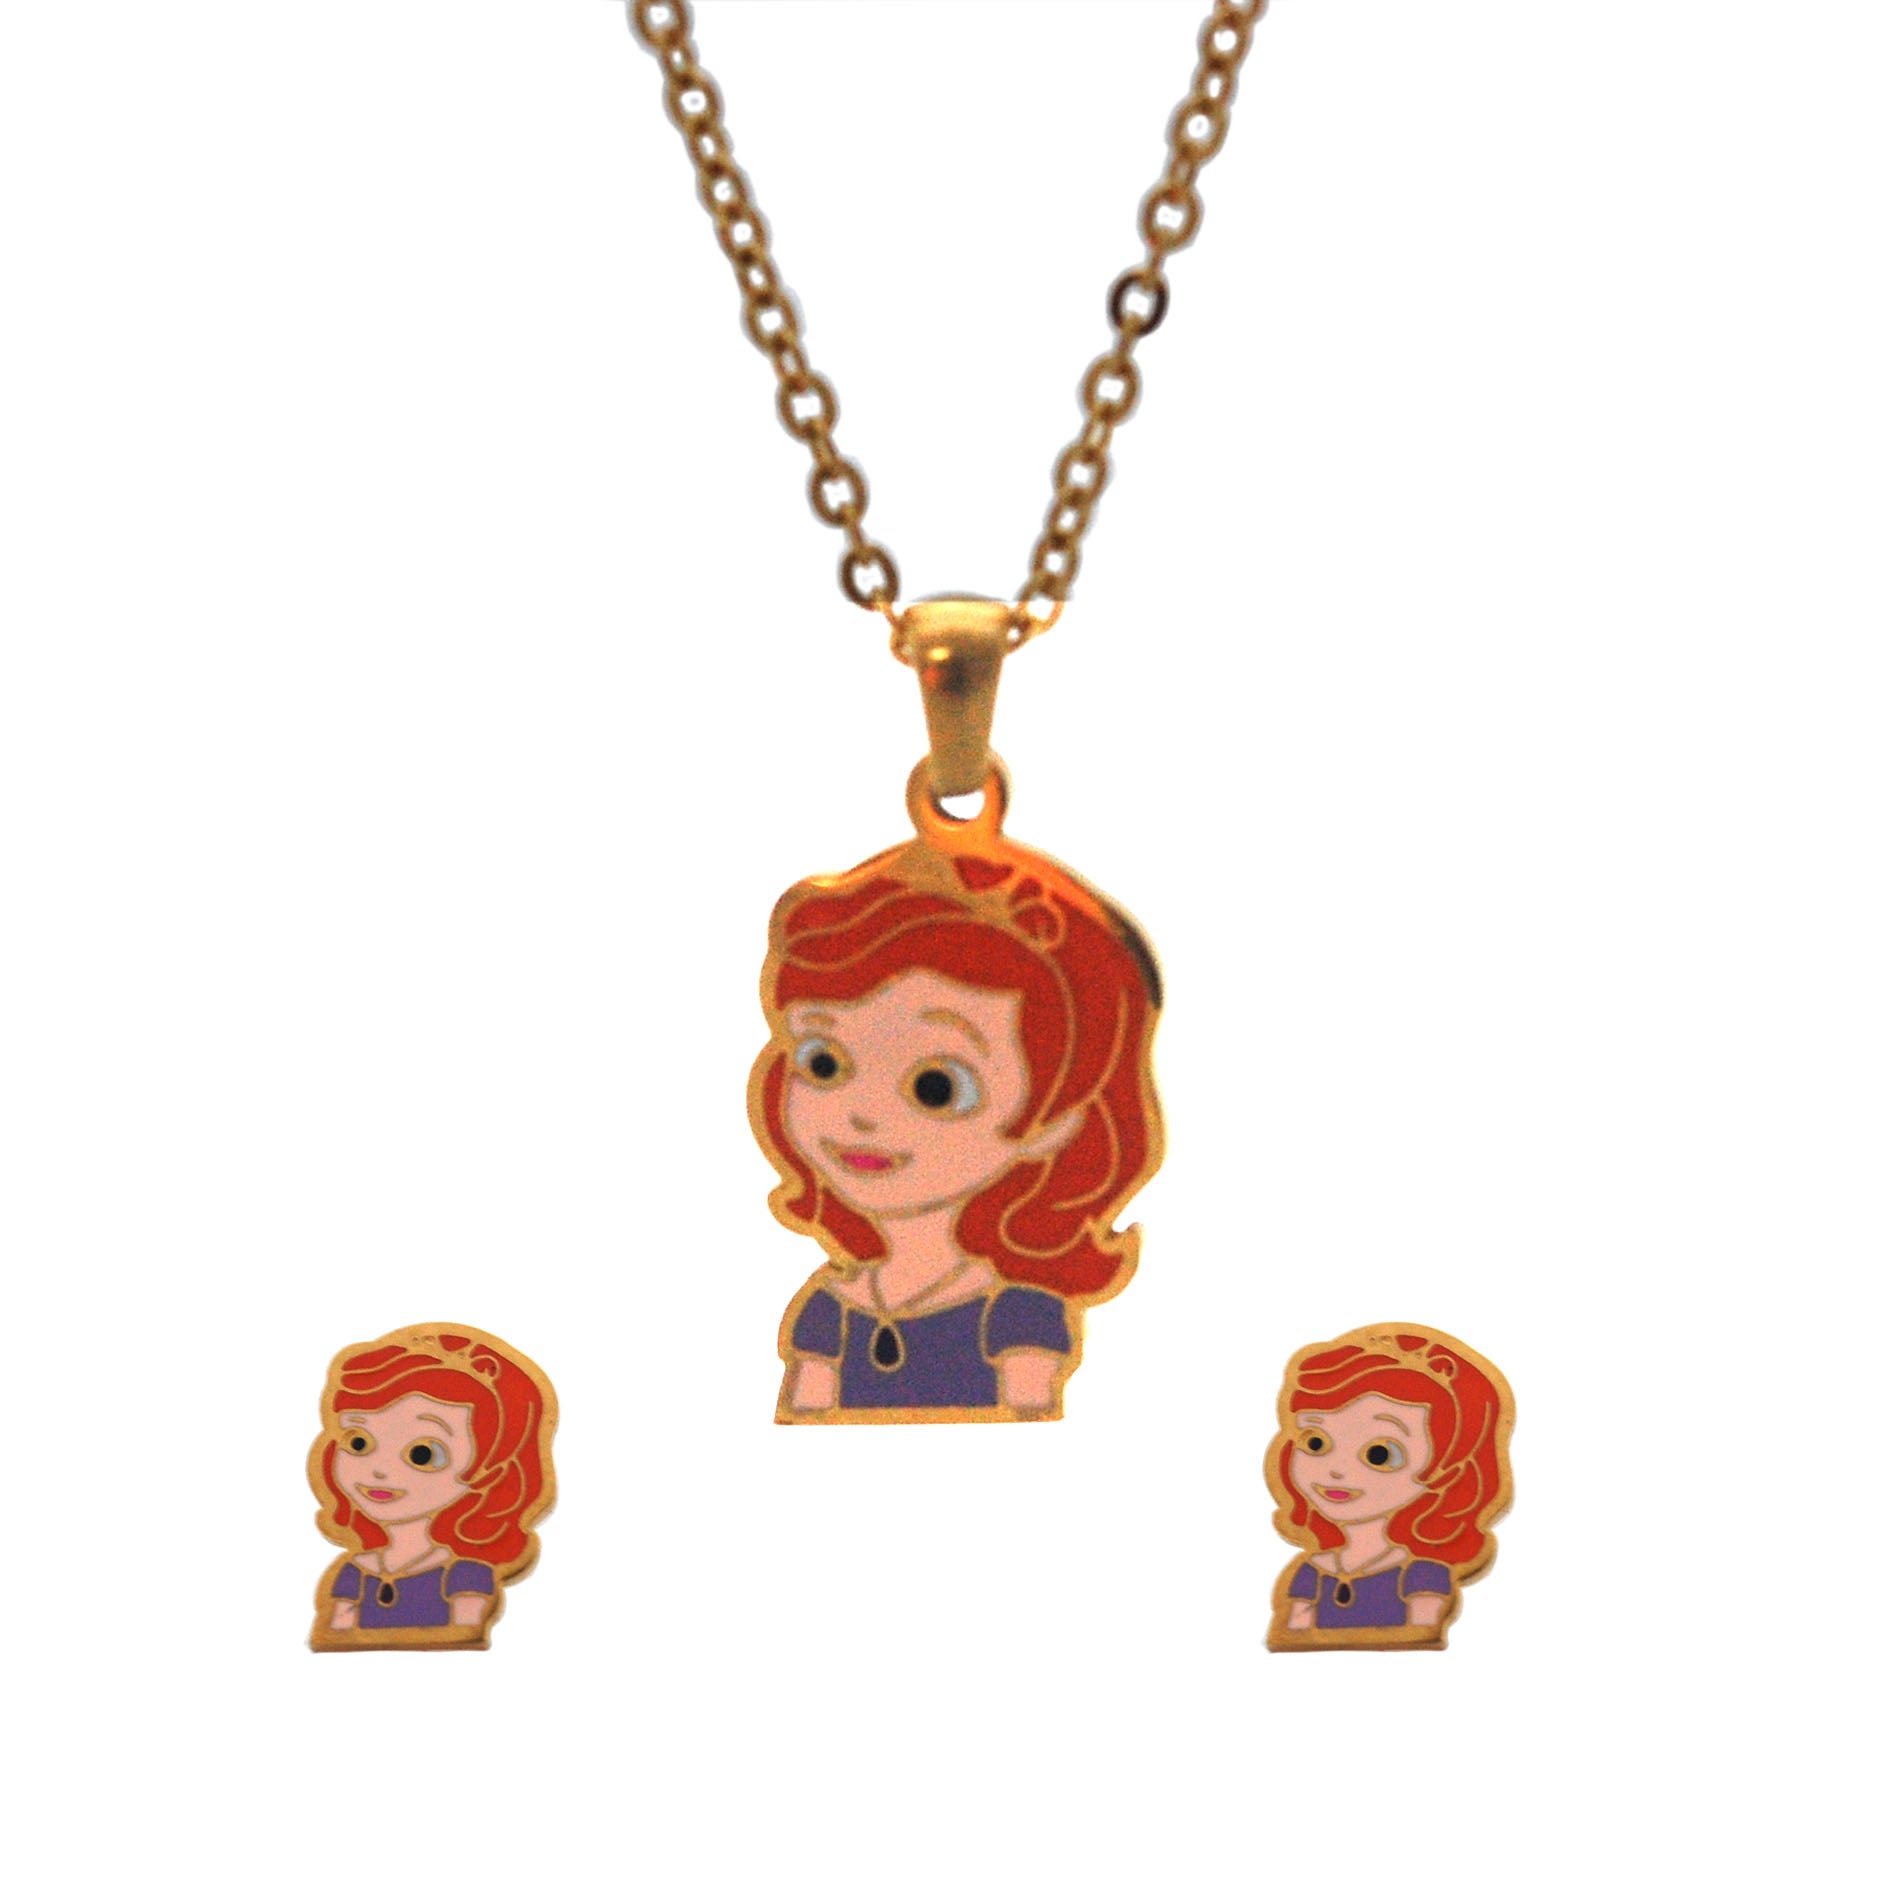 SET 5329: Gold Plated Princess Sofia The First Necklace & Earrings Set